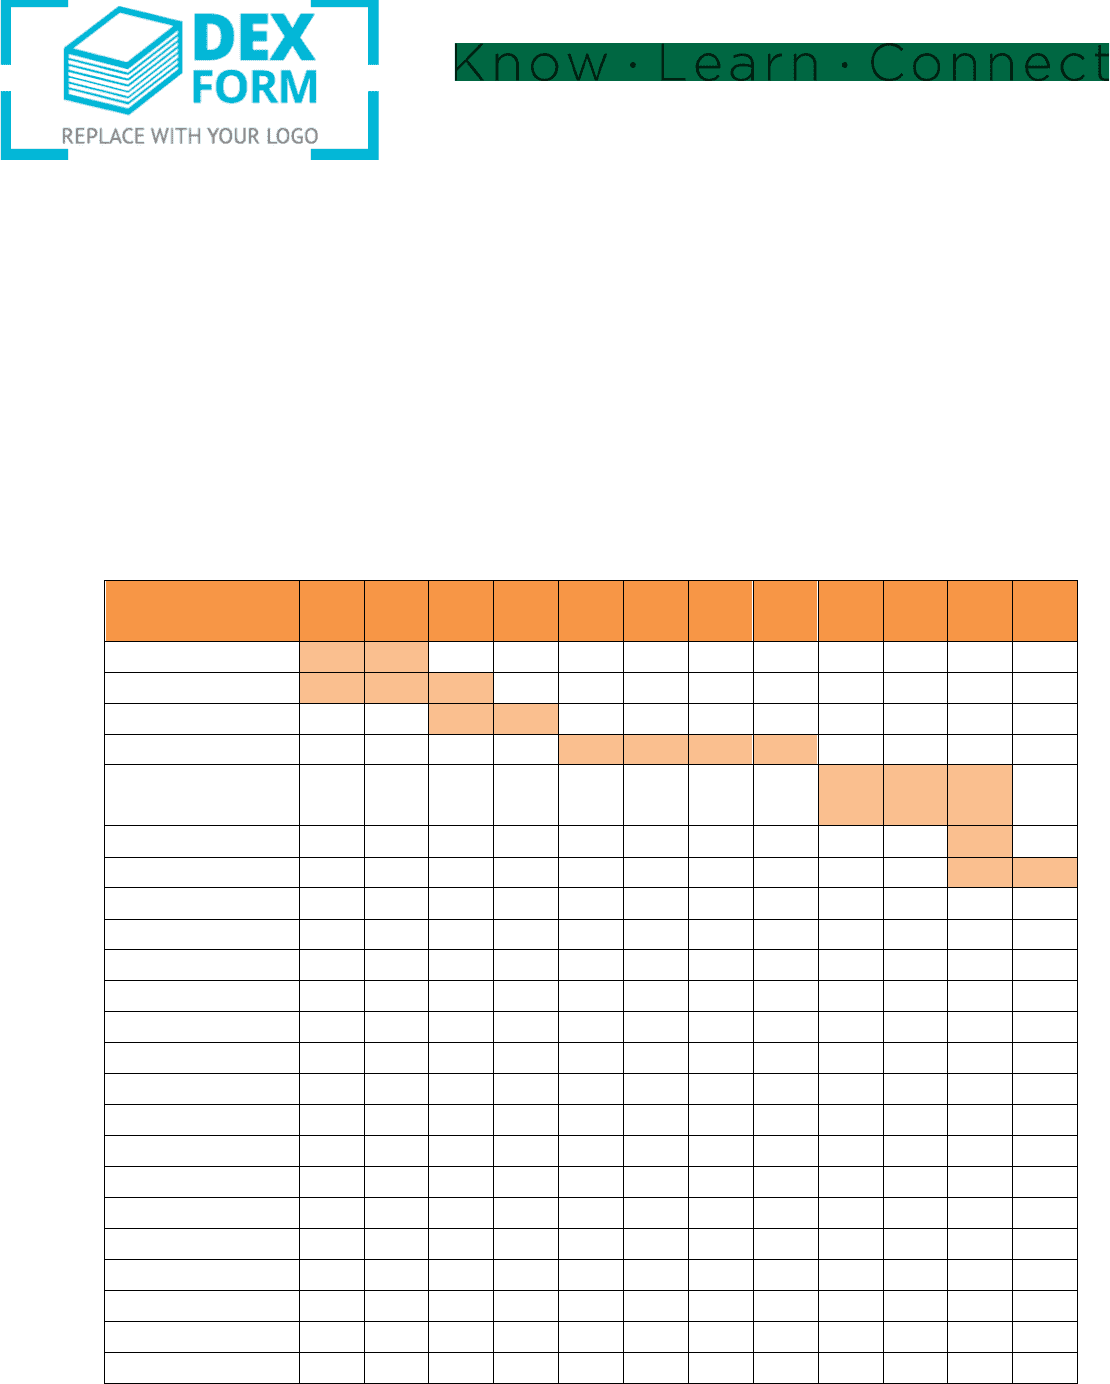 Gantt chart template in Word and Pdf formats